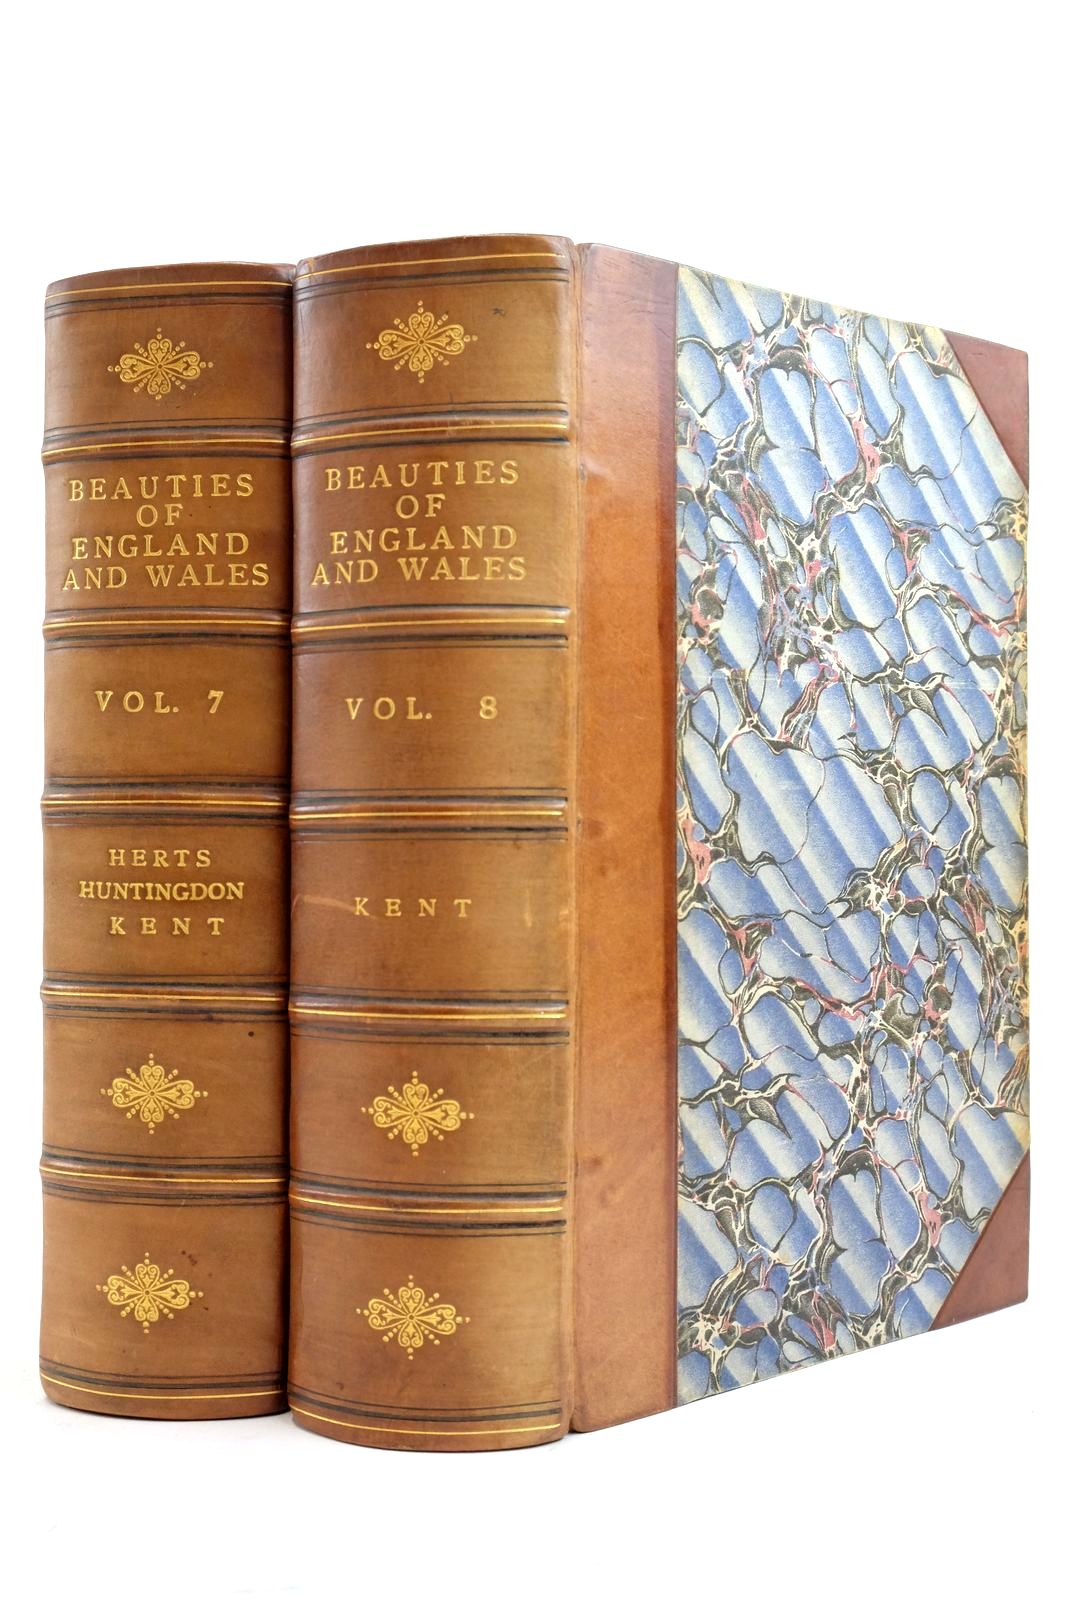 Photo of THE BEAUTIES OF ENGLAND AND WALES VOLS. VII AND VIII (2 VOLUMES) written by Brayley, Edward Wedlake published by Vernor, Hood &amp; Sharpe, Longman, Hurst (STOCK CODE: 2134498)  for sale by Stella & Rose's Books